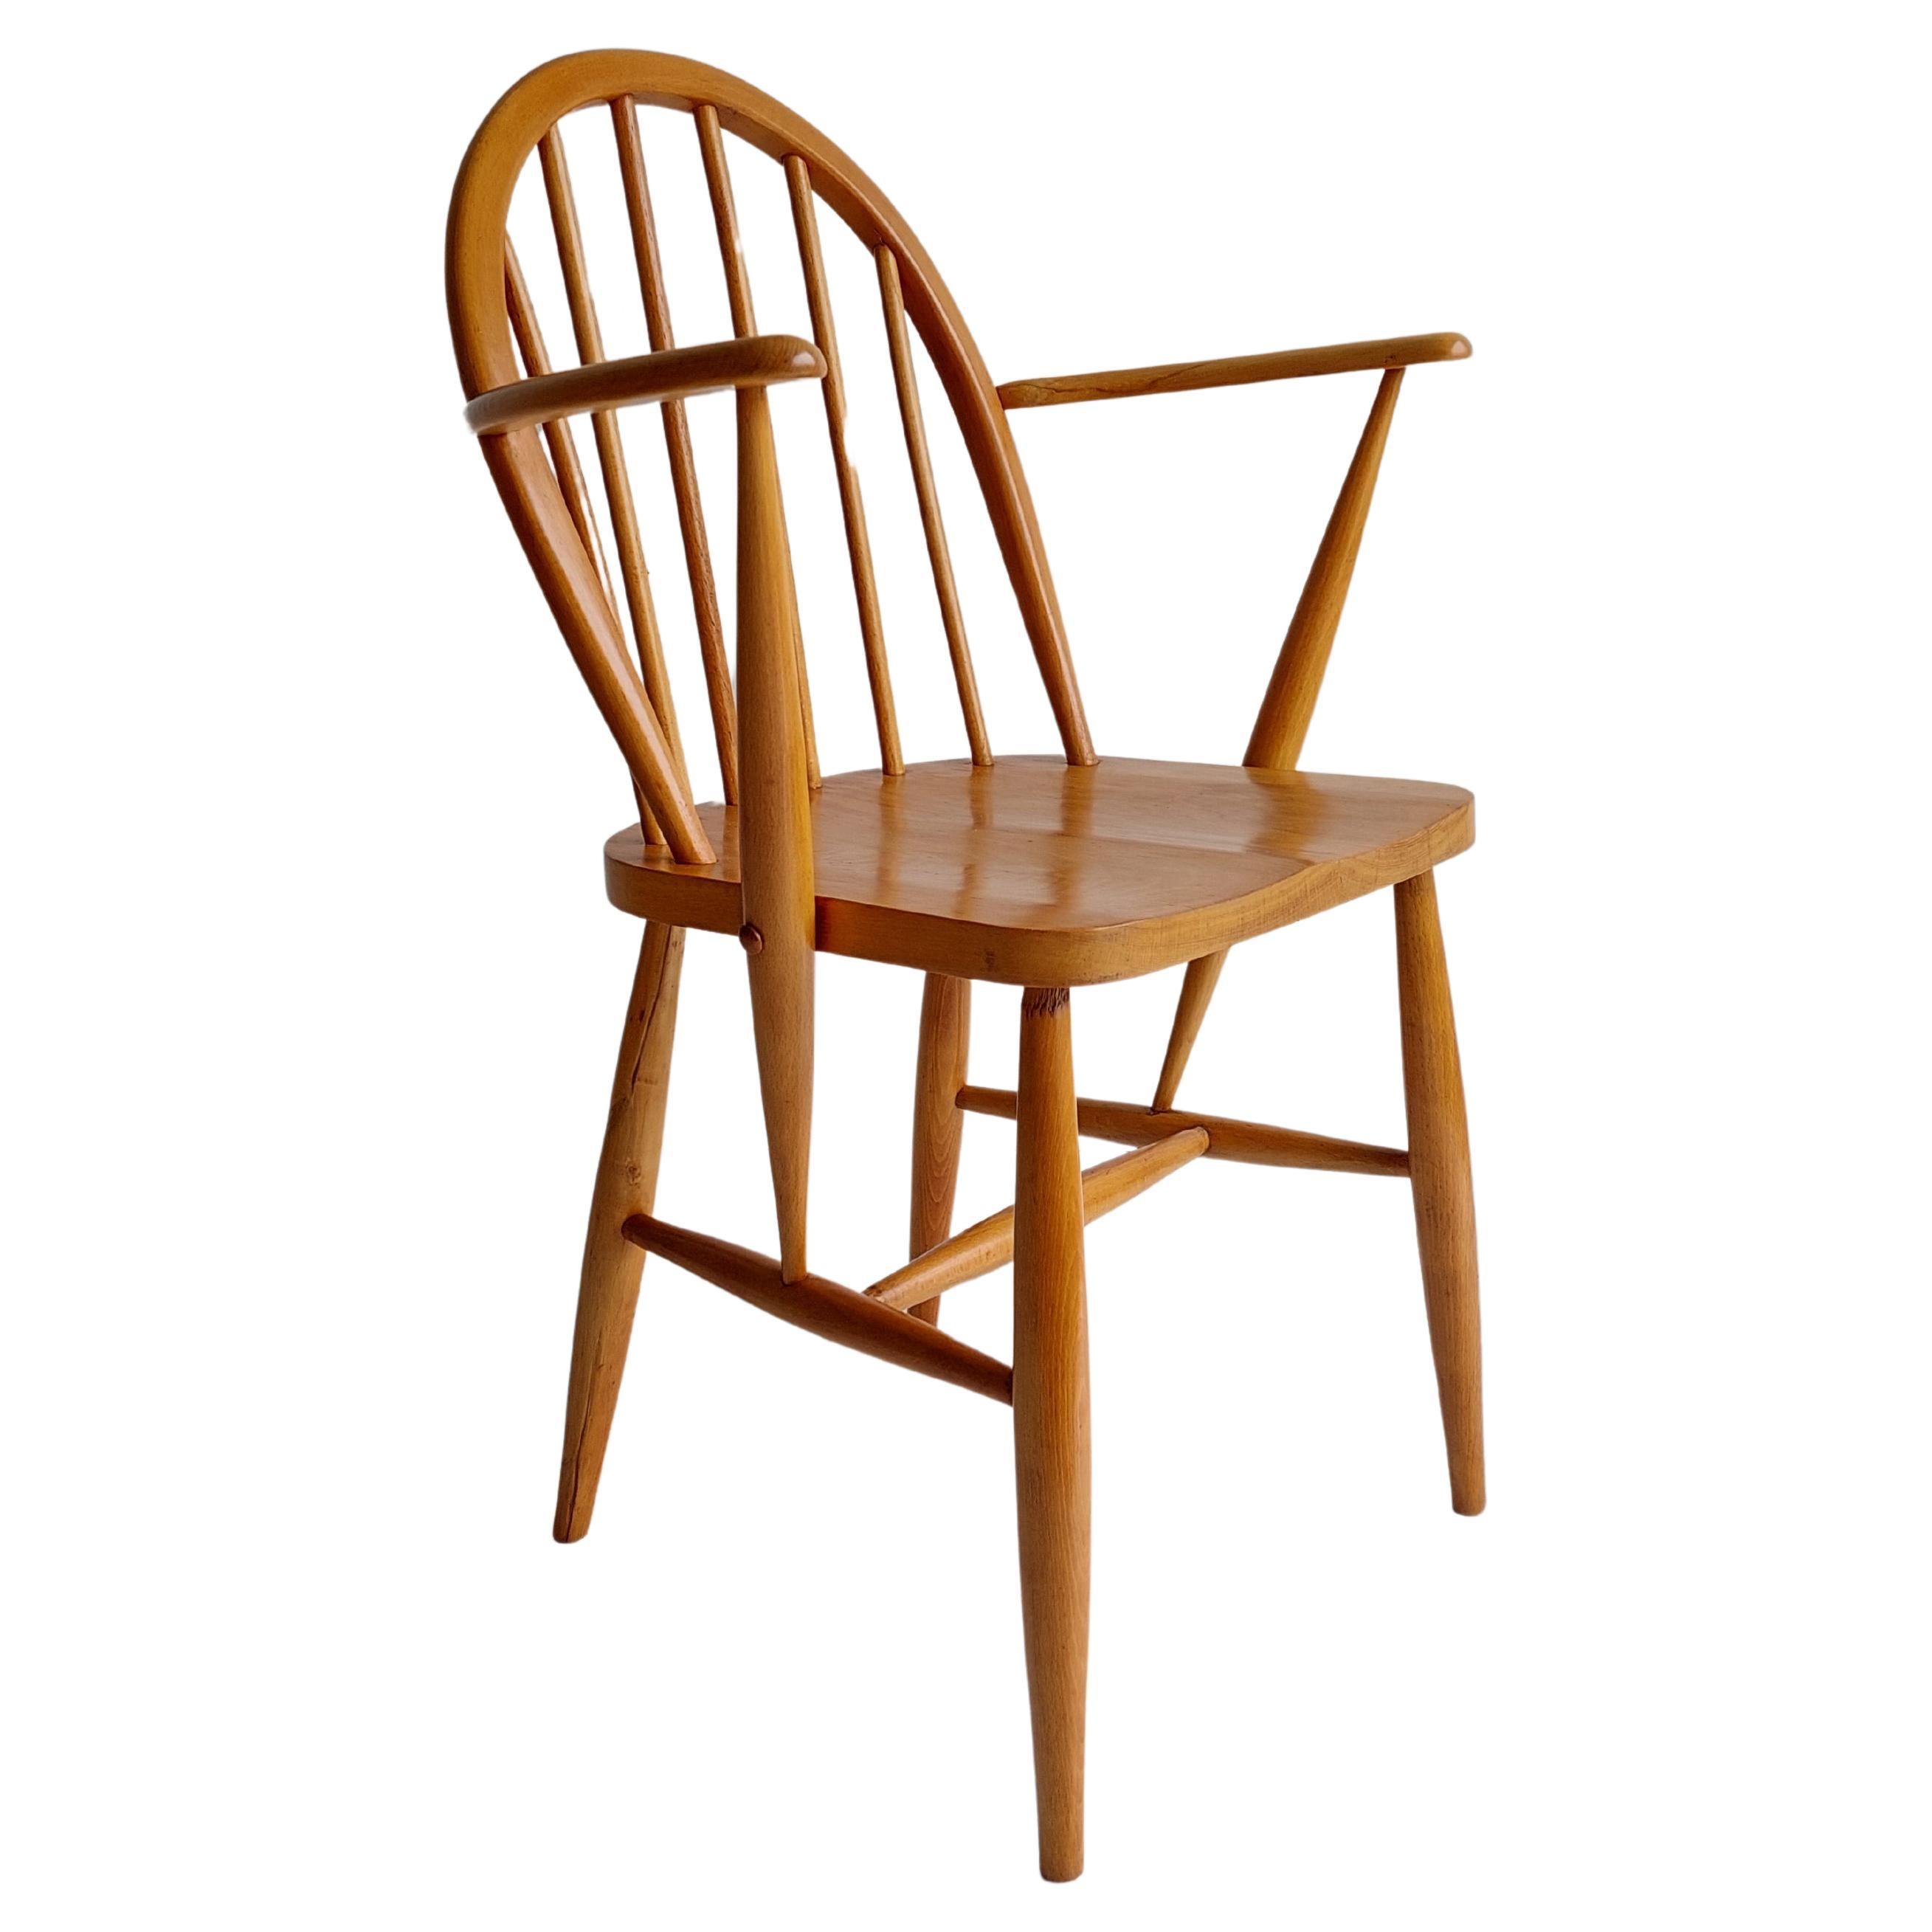 Mid Century Windsor Ercol Carver Chair Cc41 290 Model F182, 1940s 50s